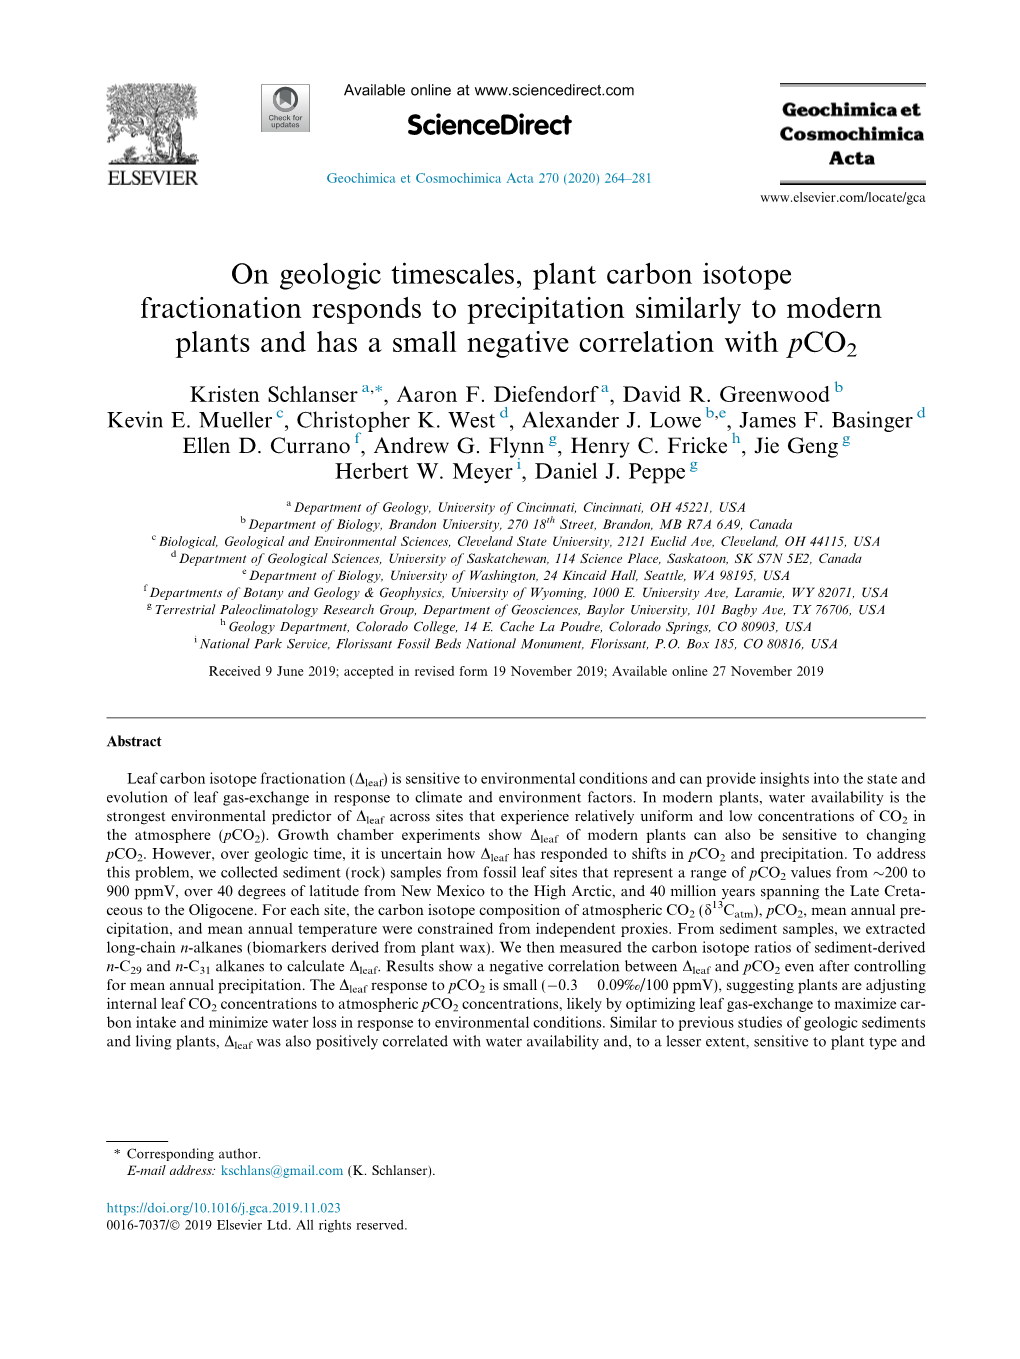 On Geologic Timescales, Plant Carbon Isotope Fractionation Responds to Precipitation Similarly to Modern Plants and Has a Small Negative Correlation with Pco2